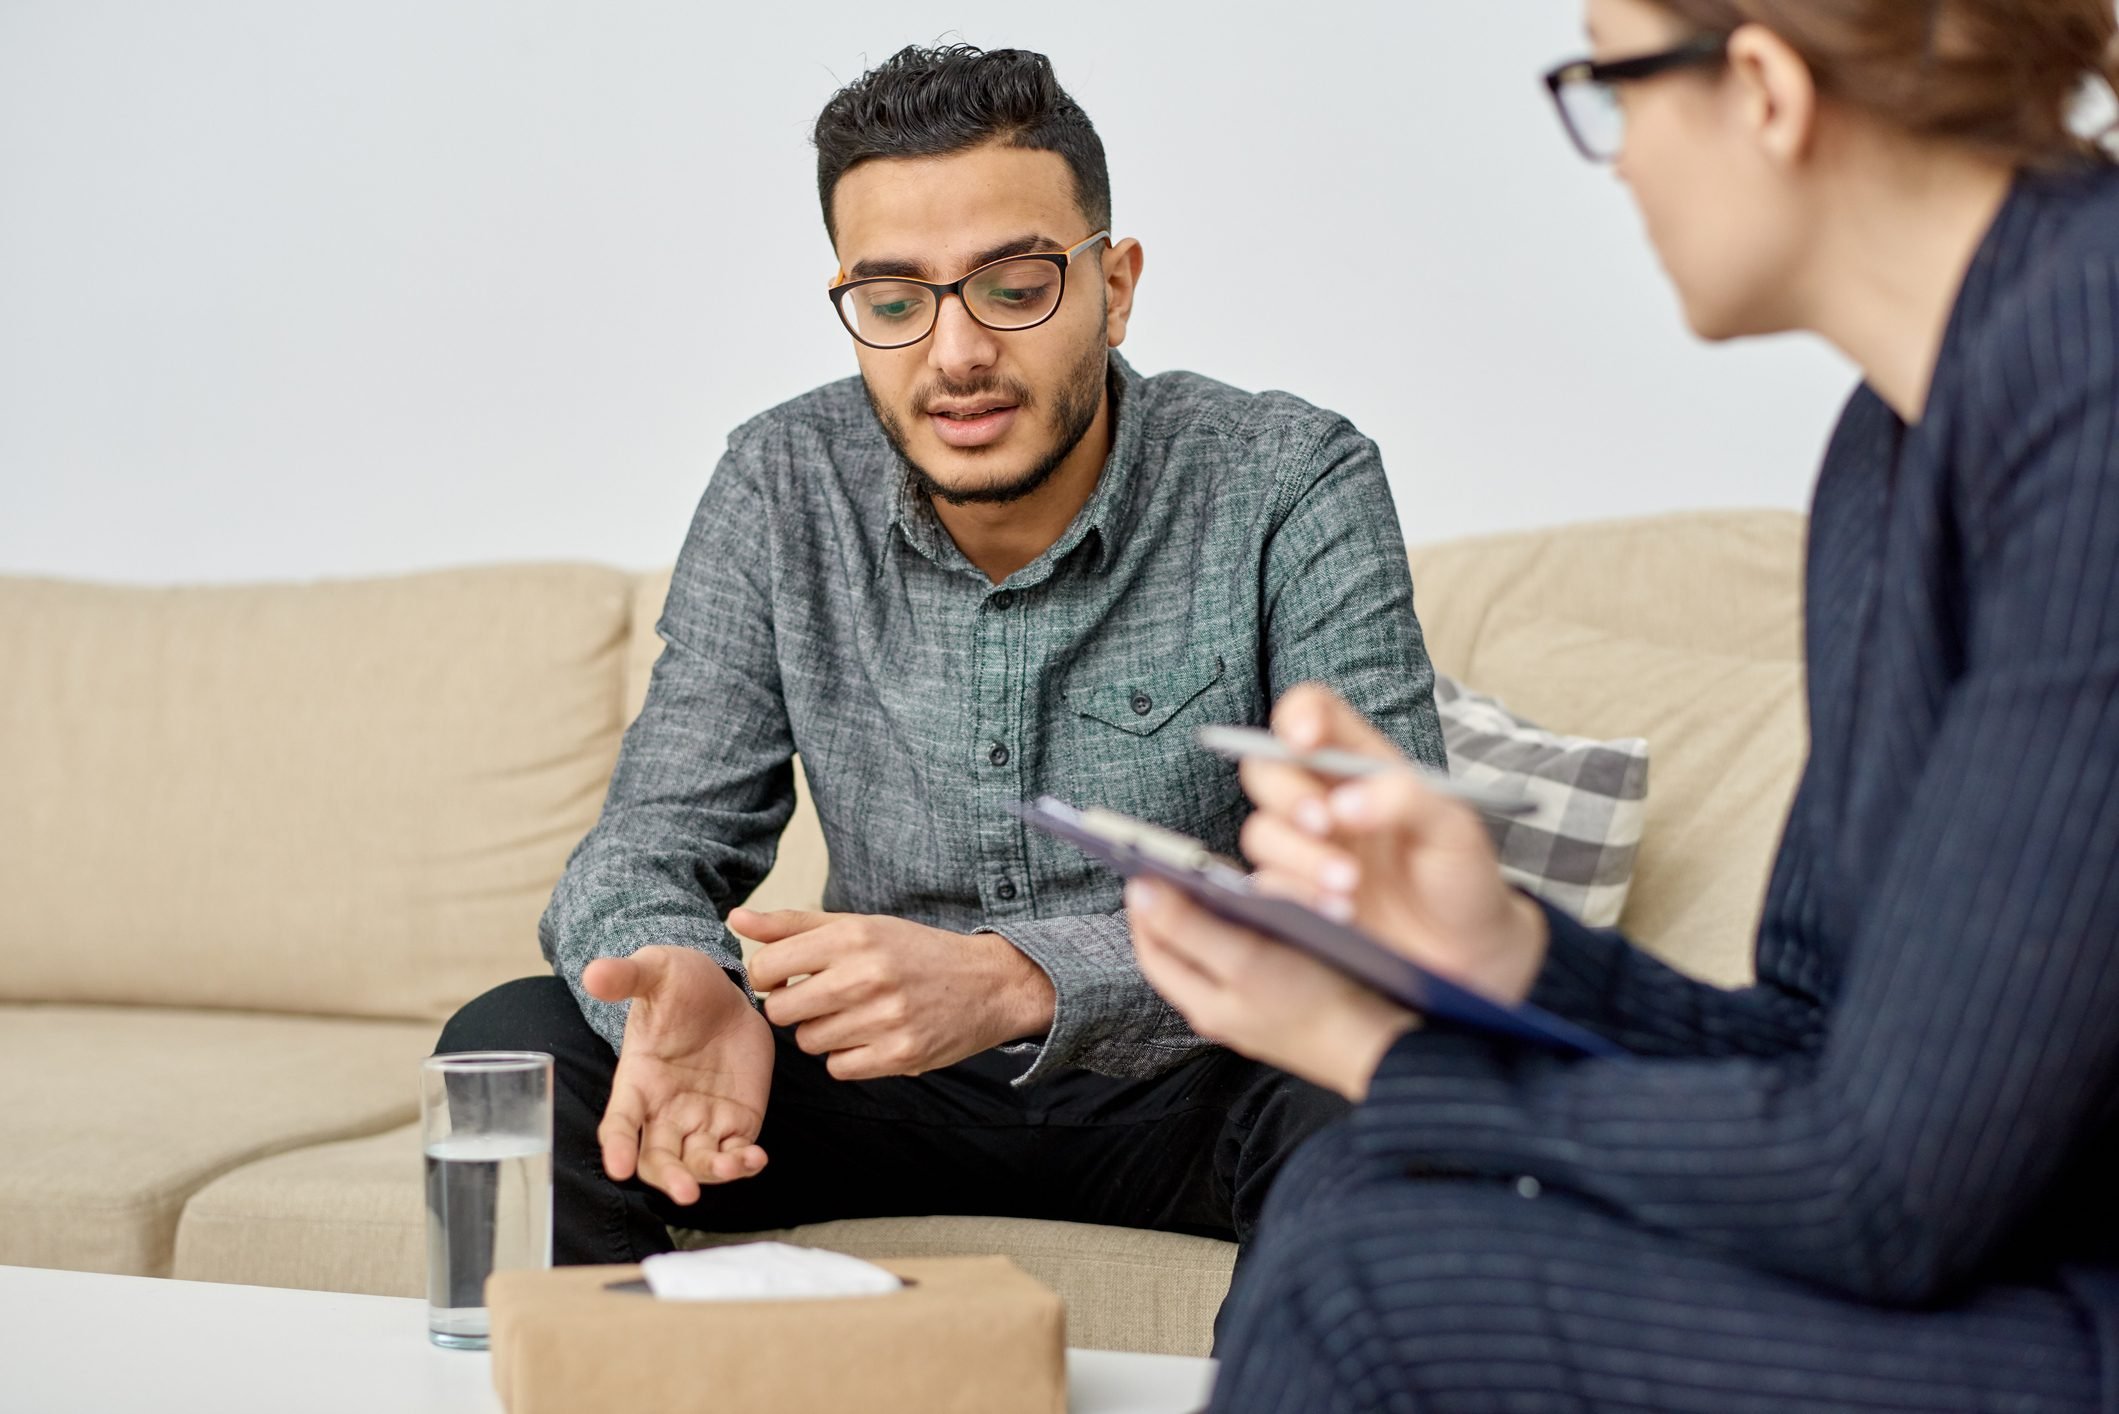 Is Your Therapy Working? 9 Signs Your Therapist Is Helping You